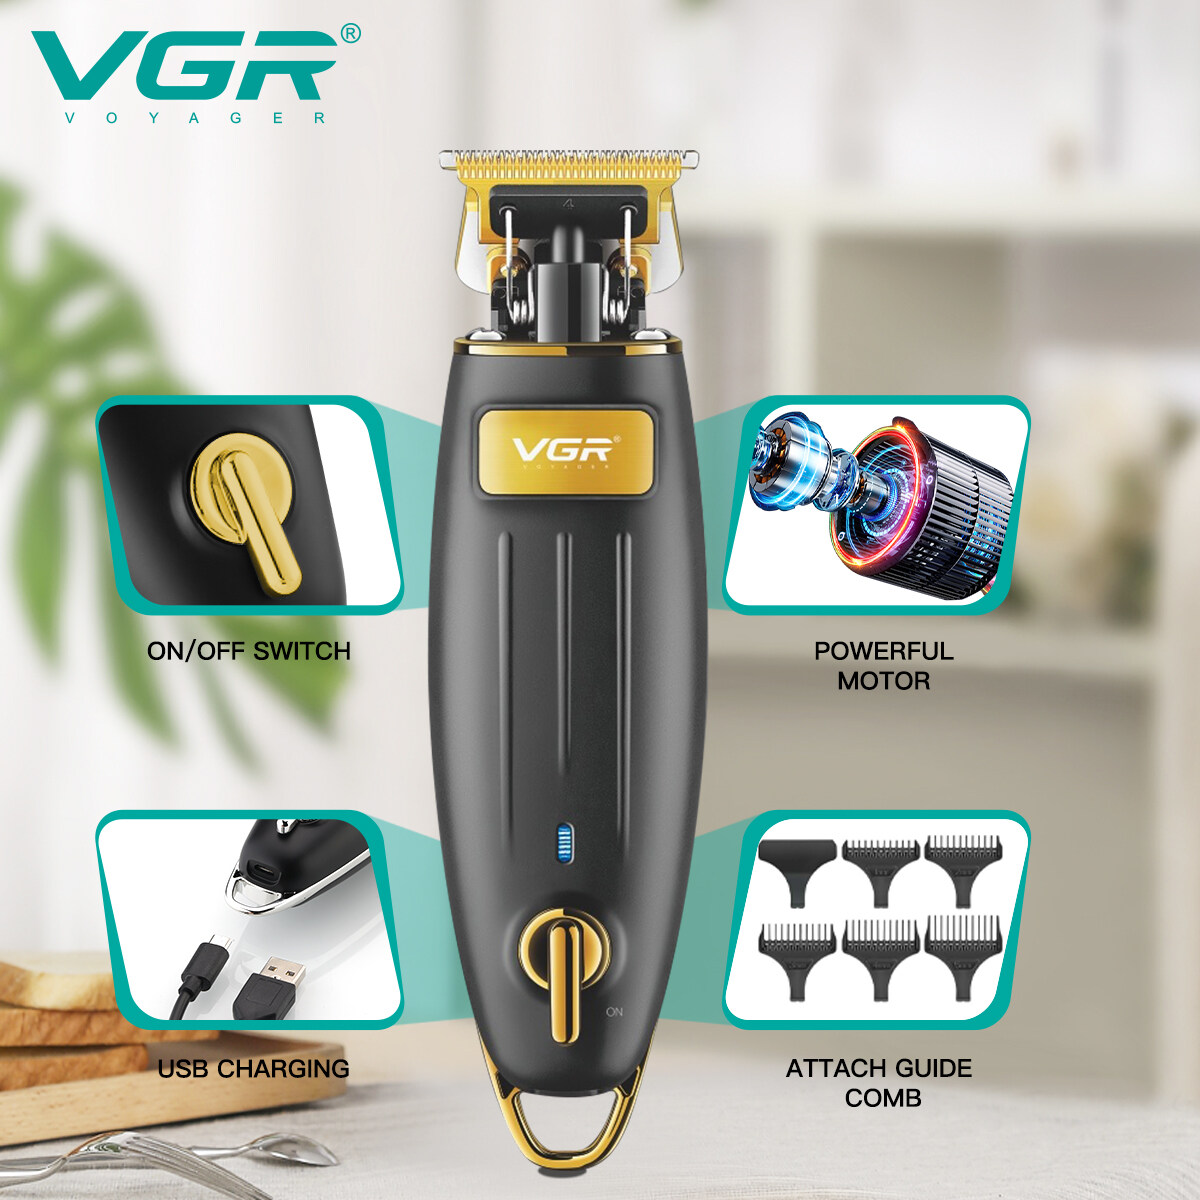 barber clippers suppliers, professional barber clippers barber supplies wholesale, hair clipper supplies near me, hair clipper supply store, customize barber clippers